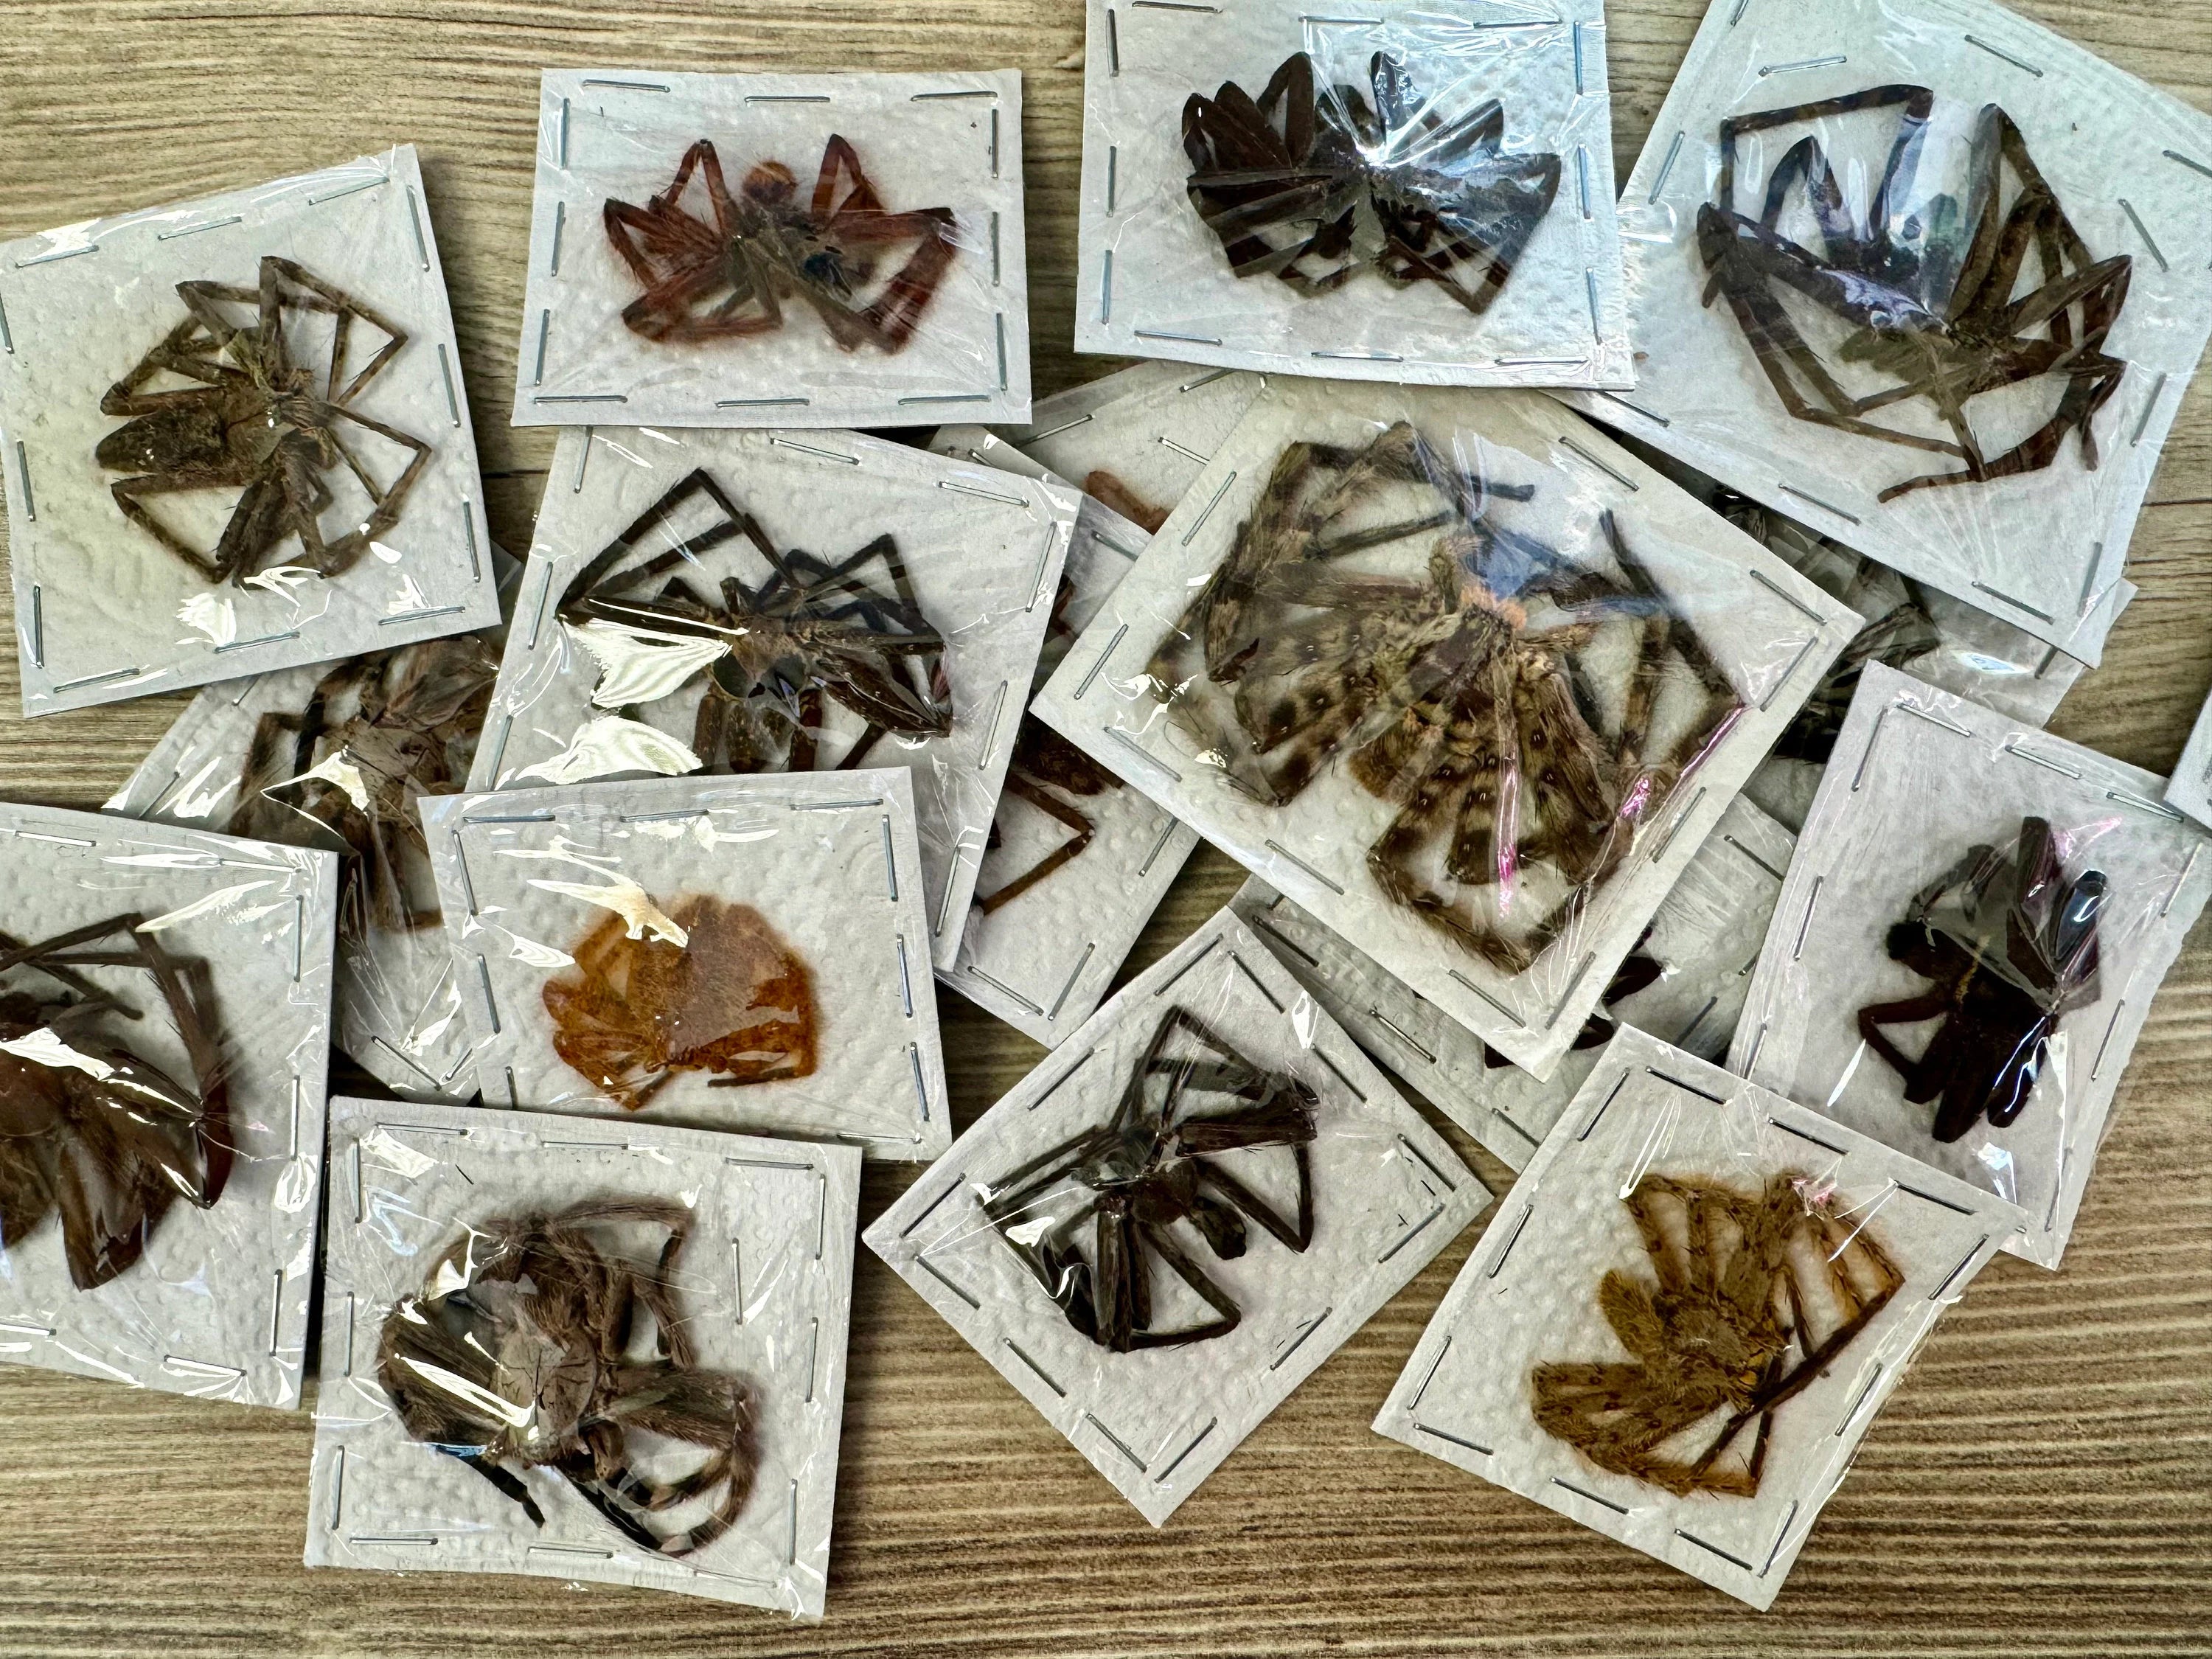 Mixed lot of REAL Spiders for artwork, crafts, and projects! Assorted